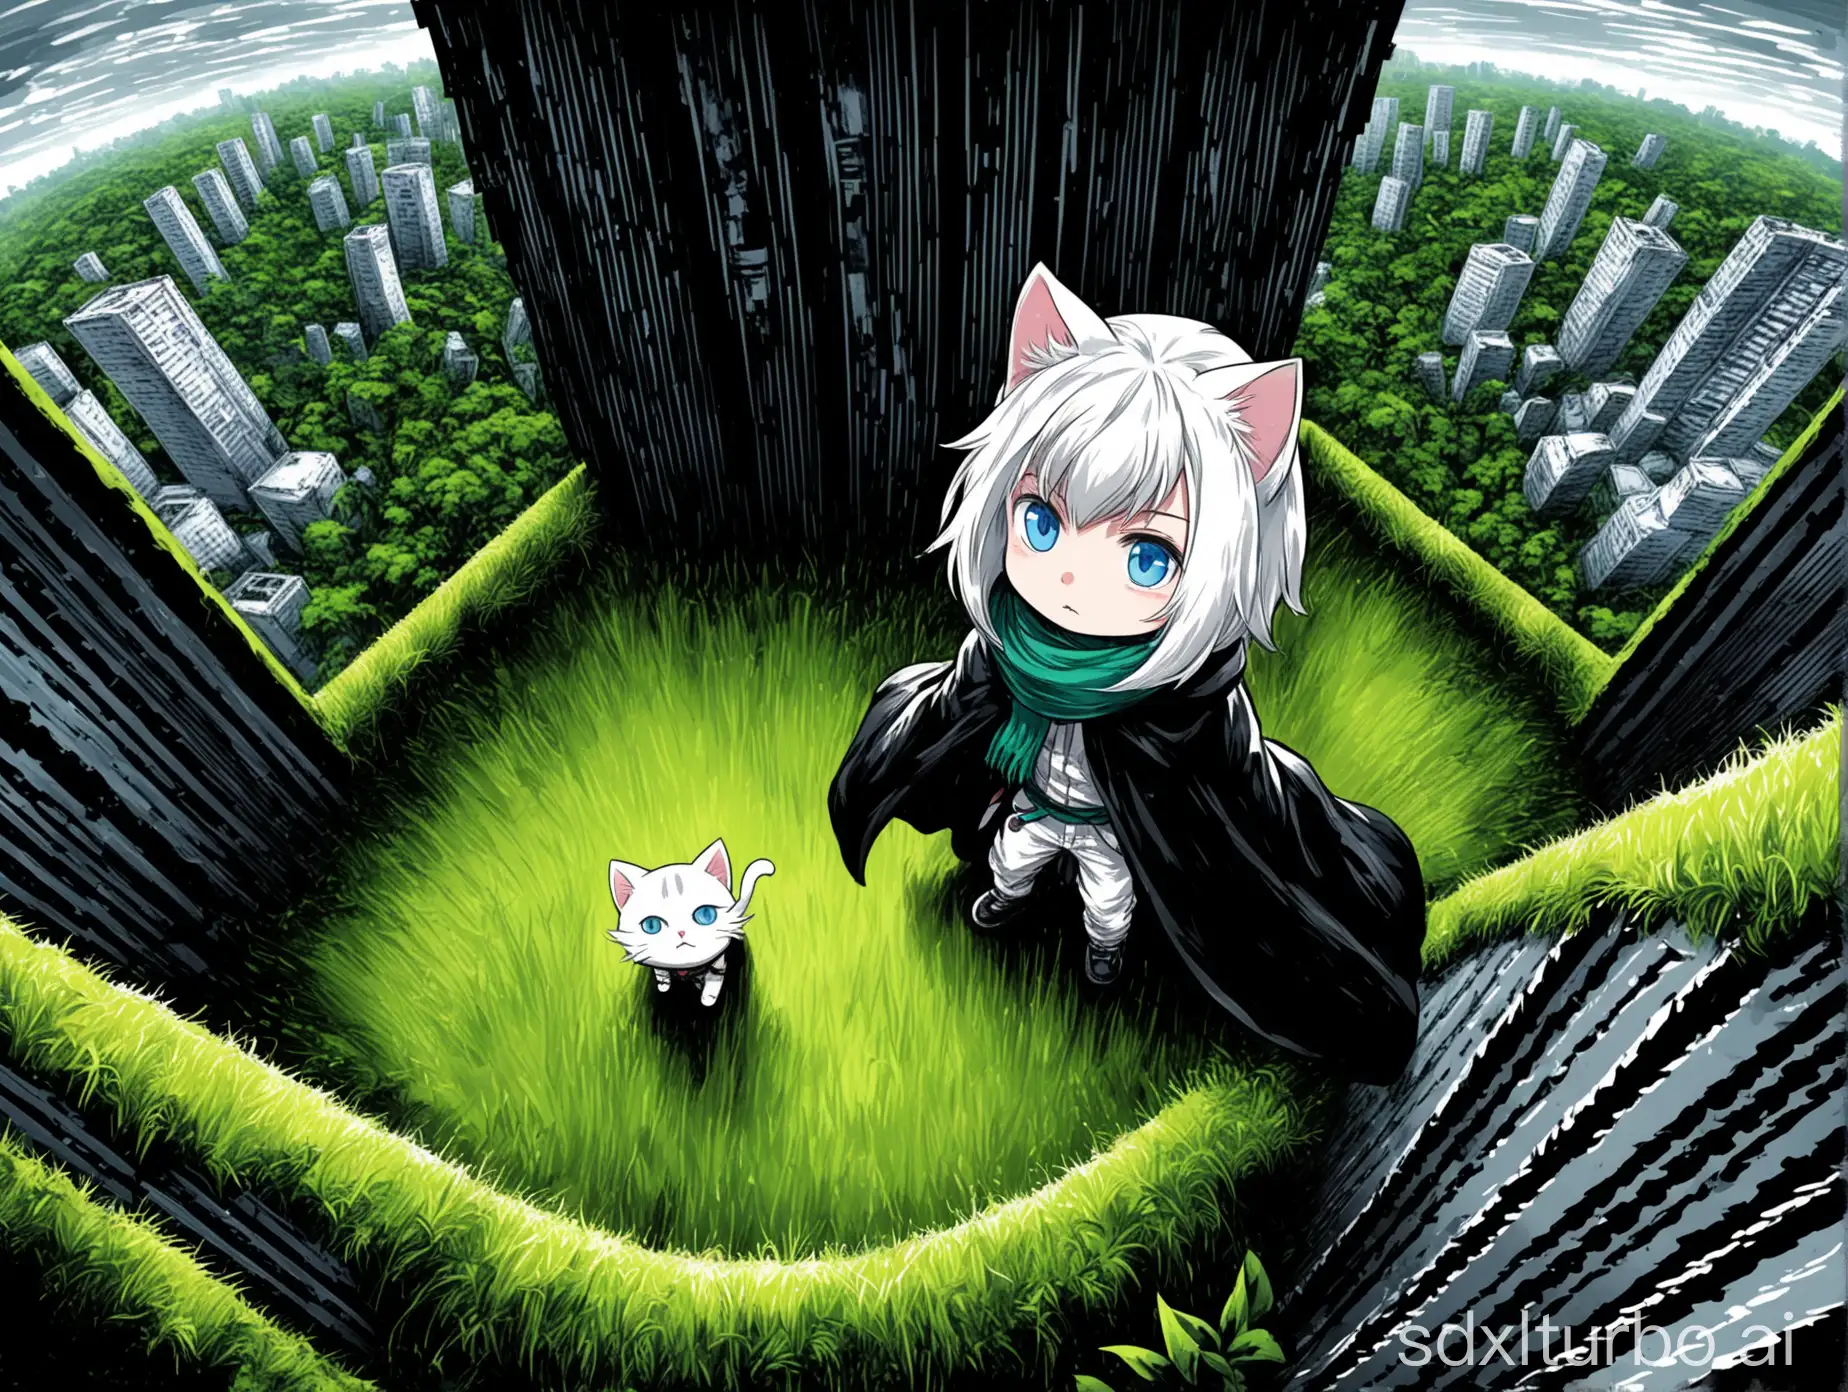 NekoboyAI-Chibi-Boy-with-Cat-Features-on-Rooftop-Overlooking-Cityscape